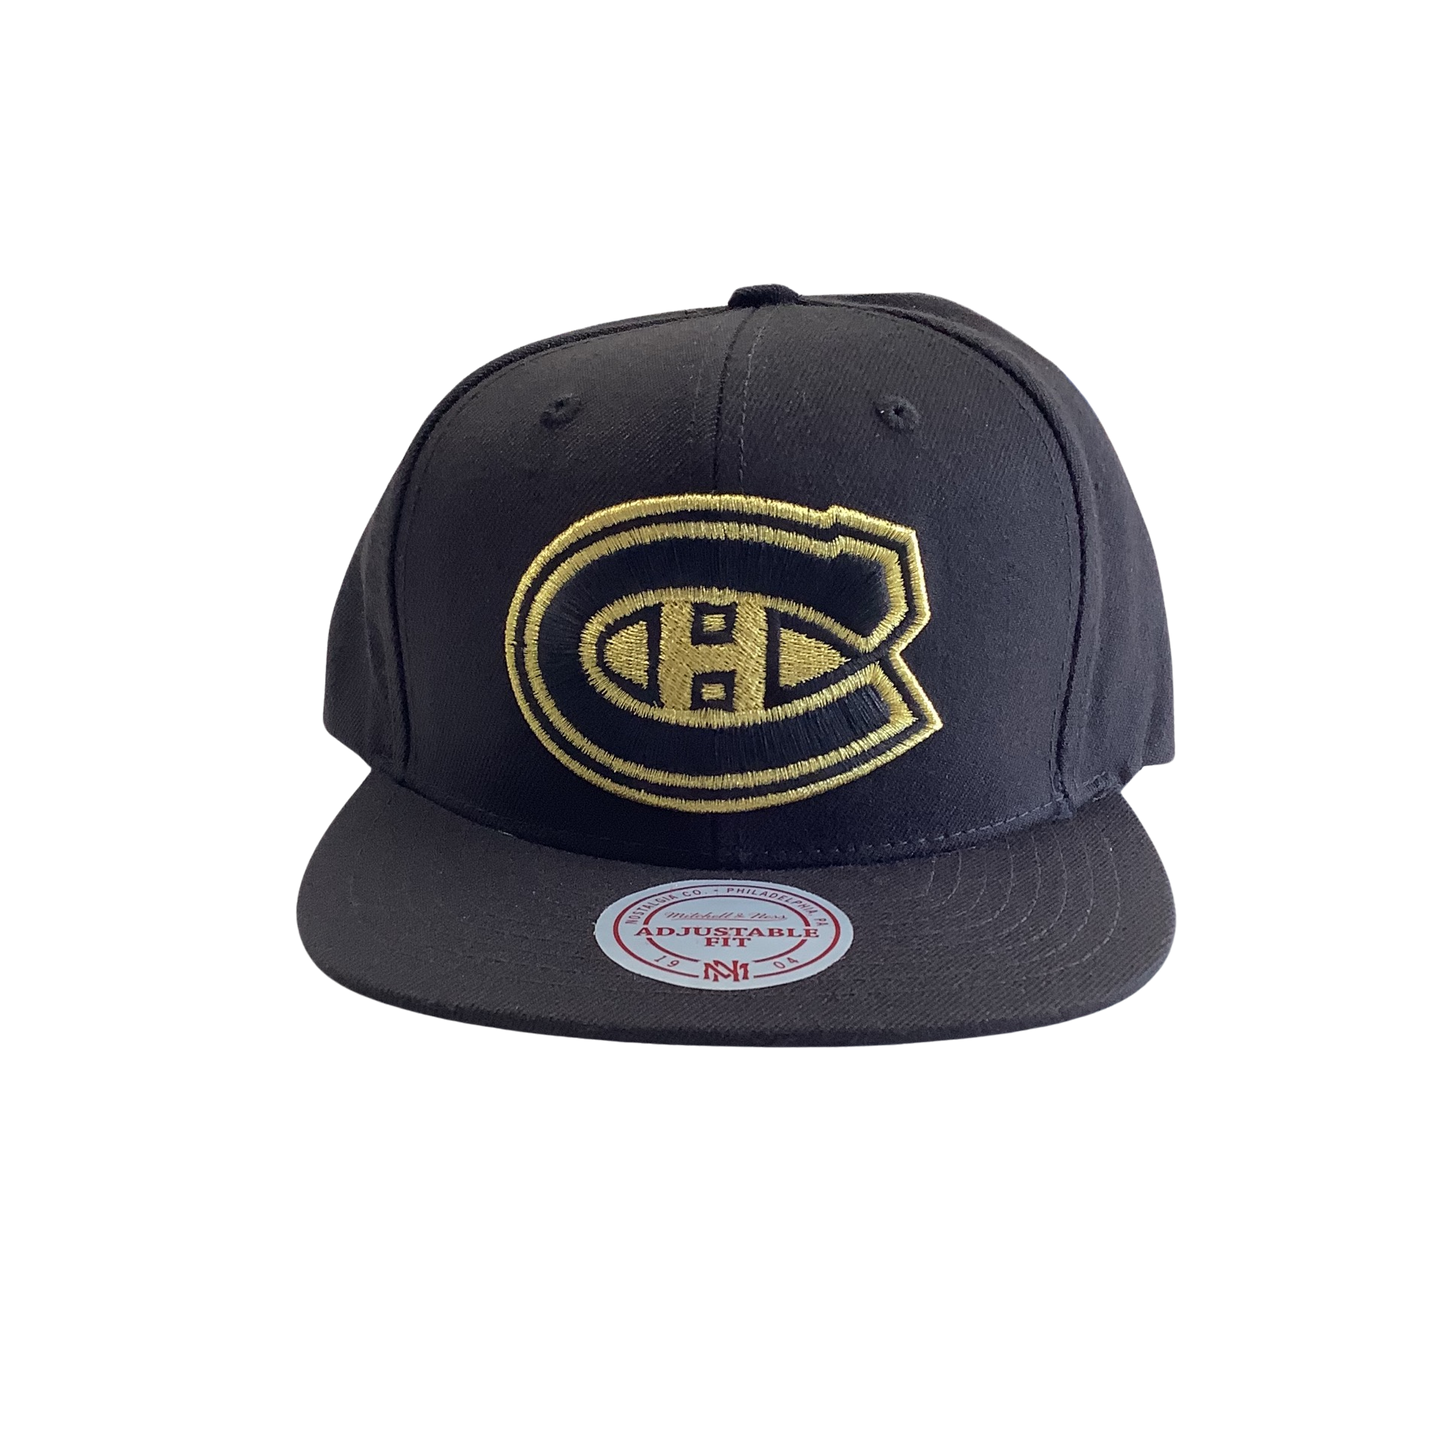 Mitchell & Ness Canadiens Montreal